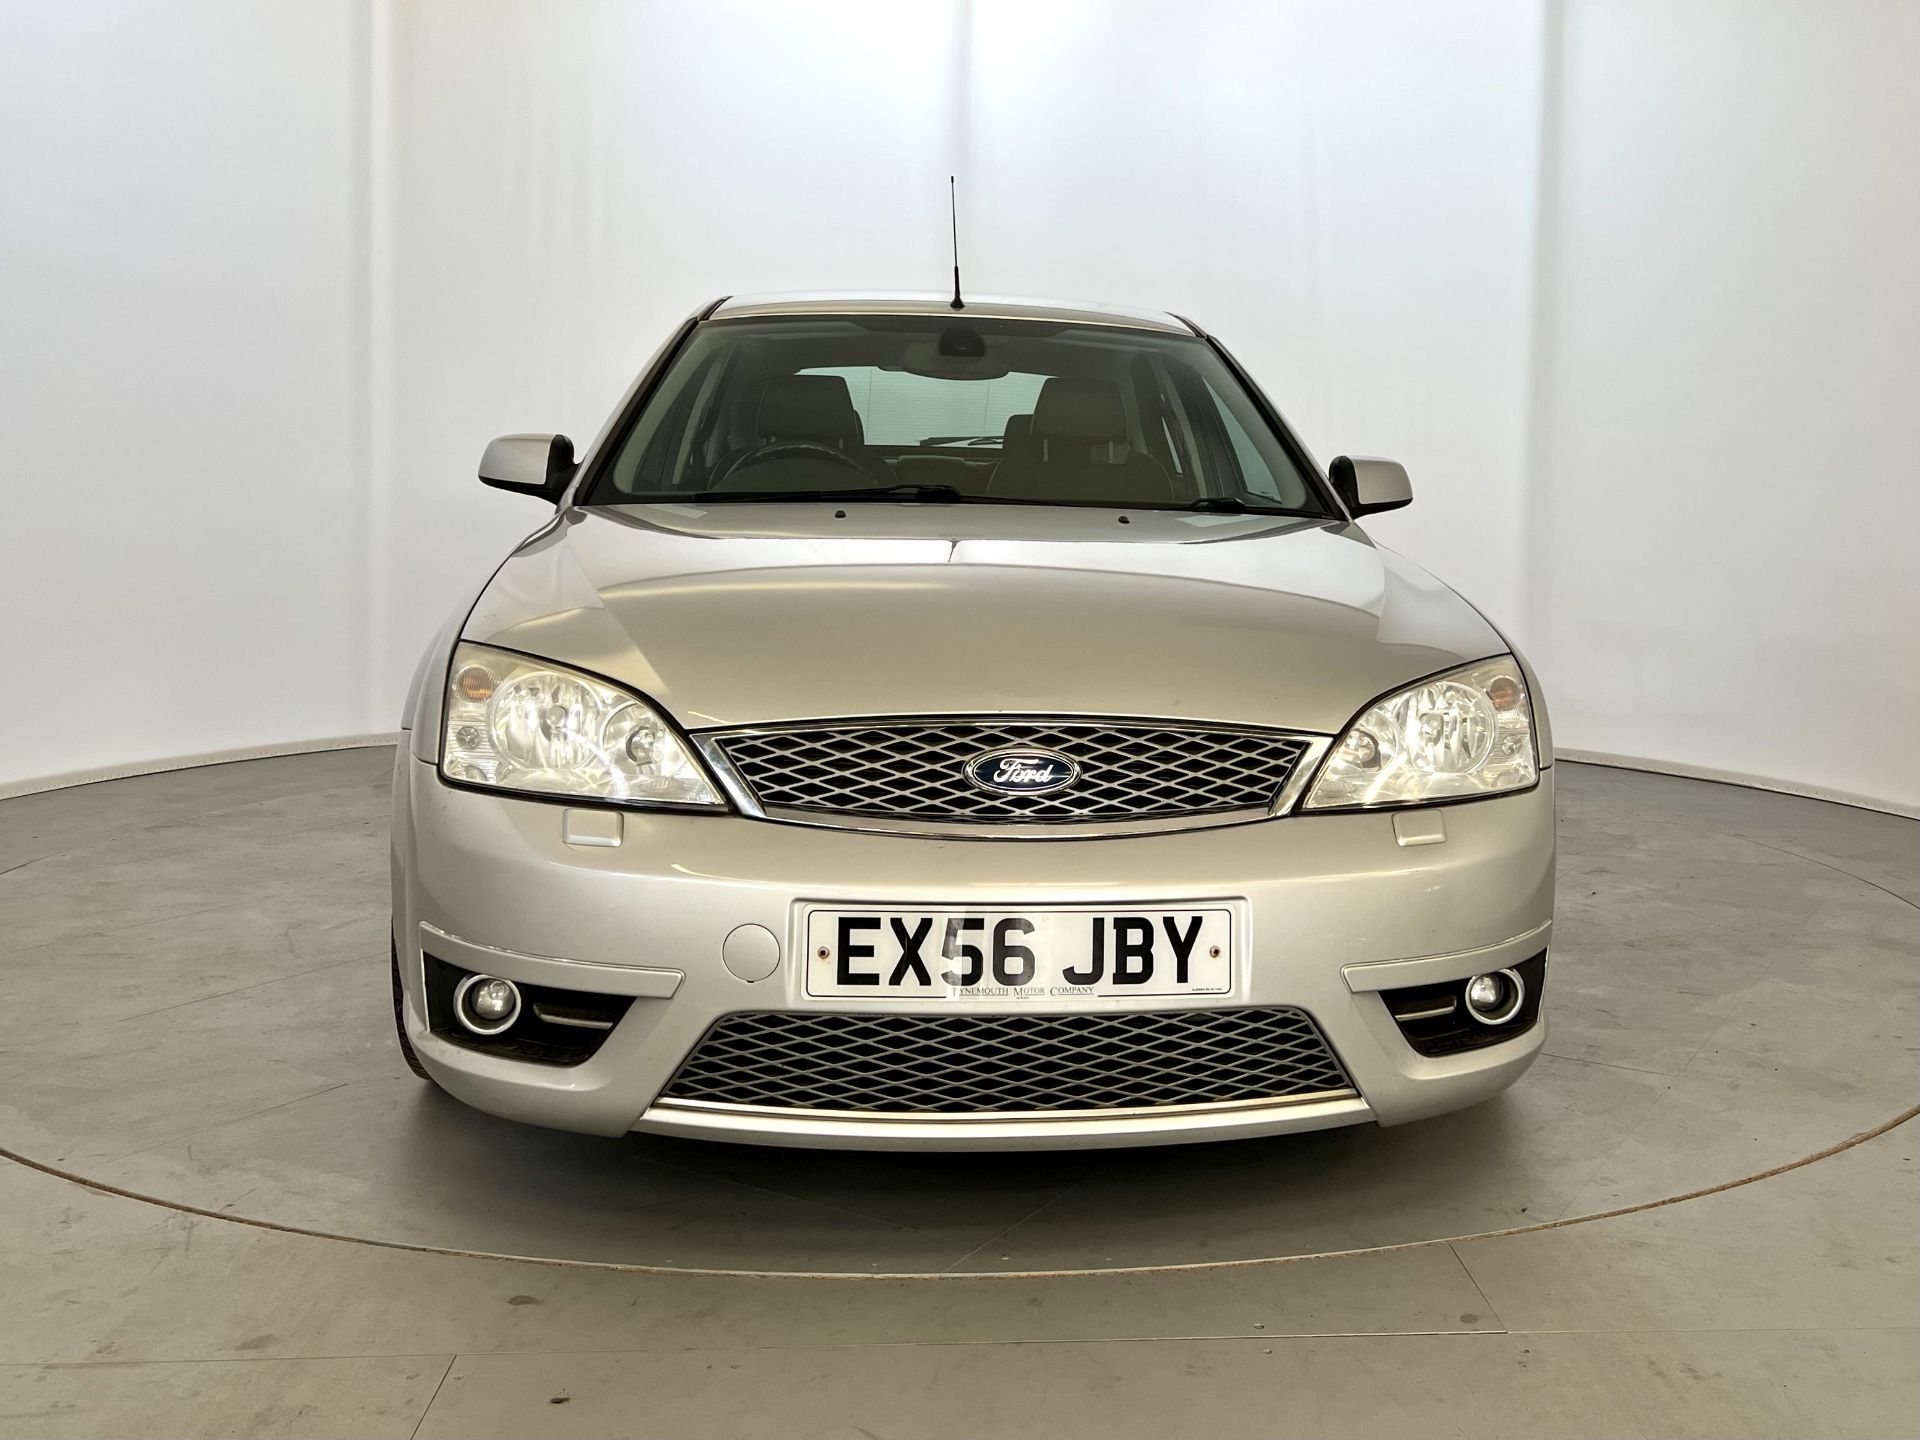 Ford Mondeo ST220 - Image 2 of 37